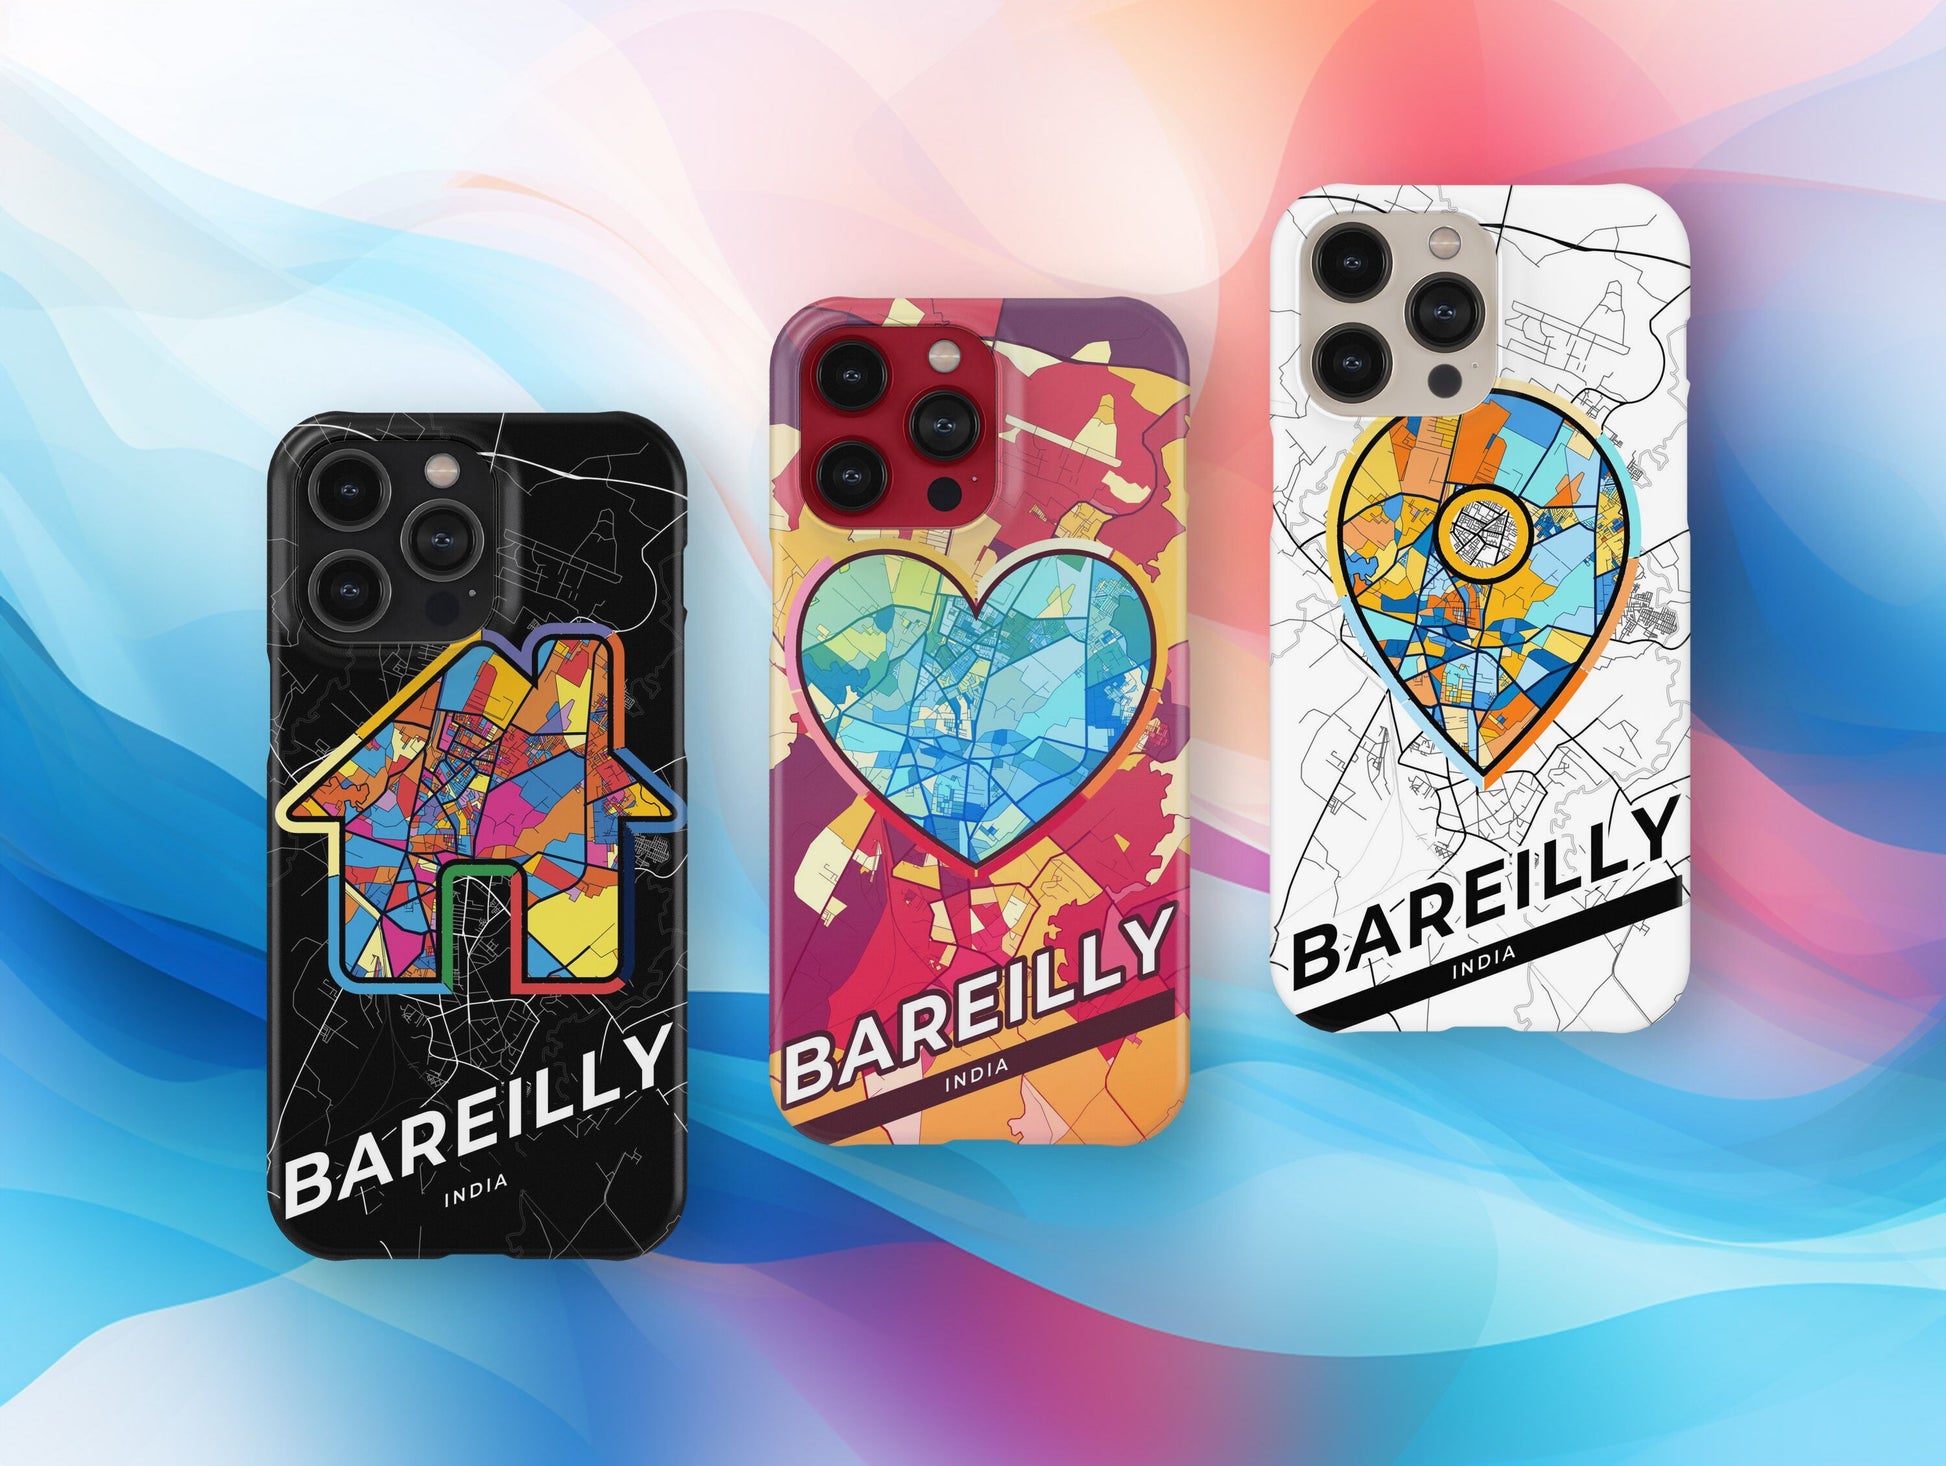 Bareilly India slim phone case with colorful icon. Birthday, wedding or housewarming gift. Couple match cases.